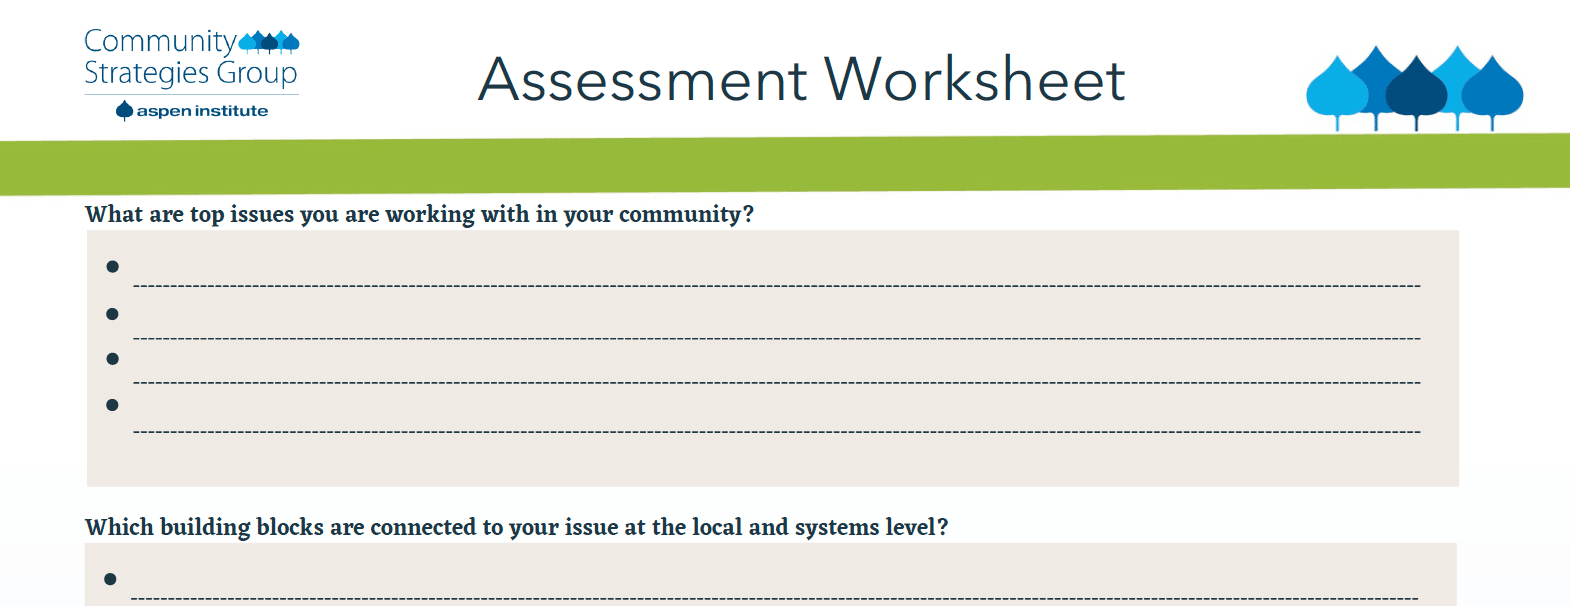 Community Strategies Group Assessment Worksheet. What are top issues you are working with in your community? Which building blocks are connected to your issue at the local and systems level?